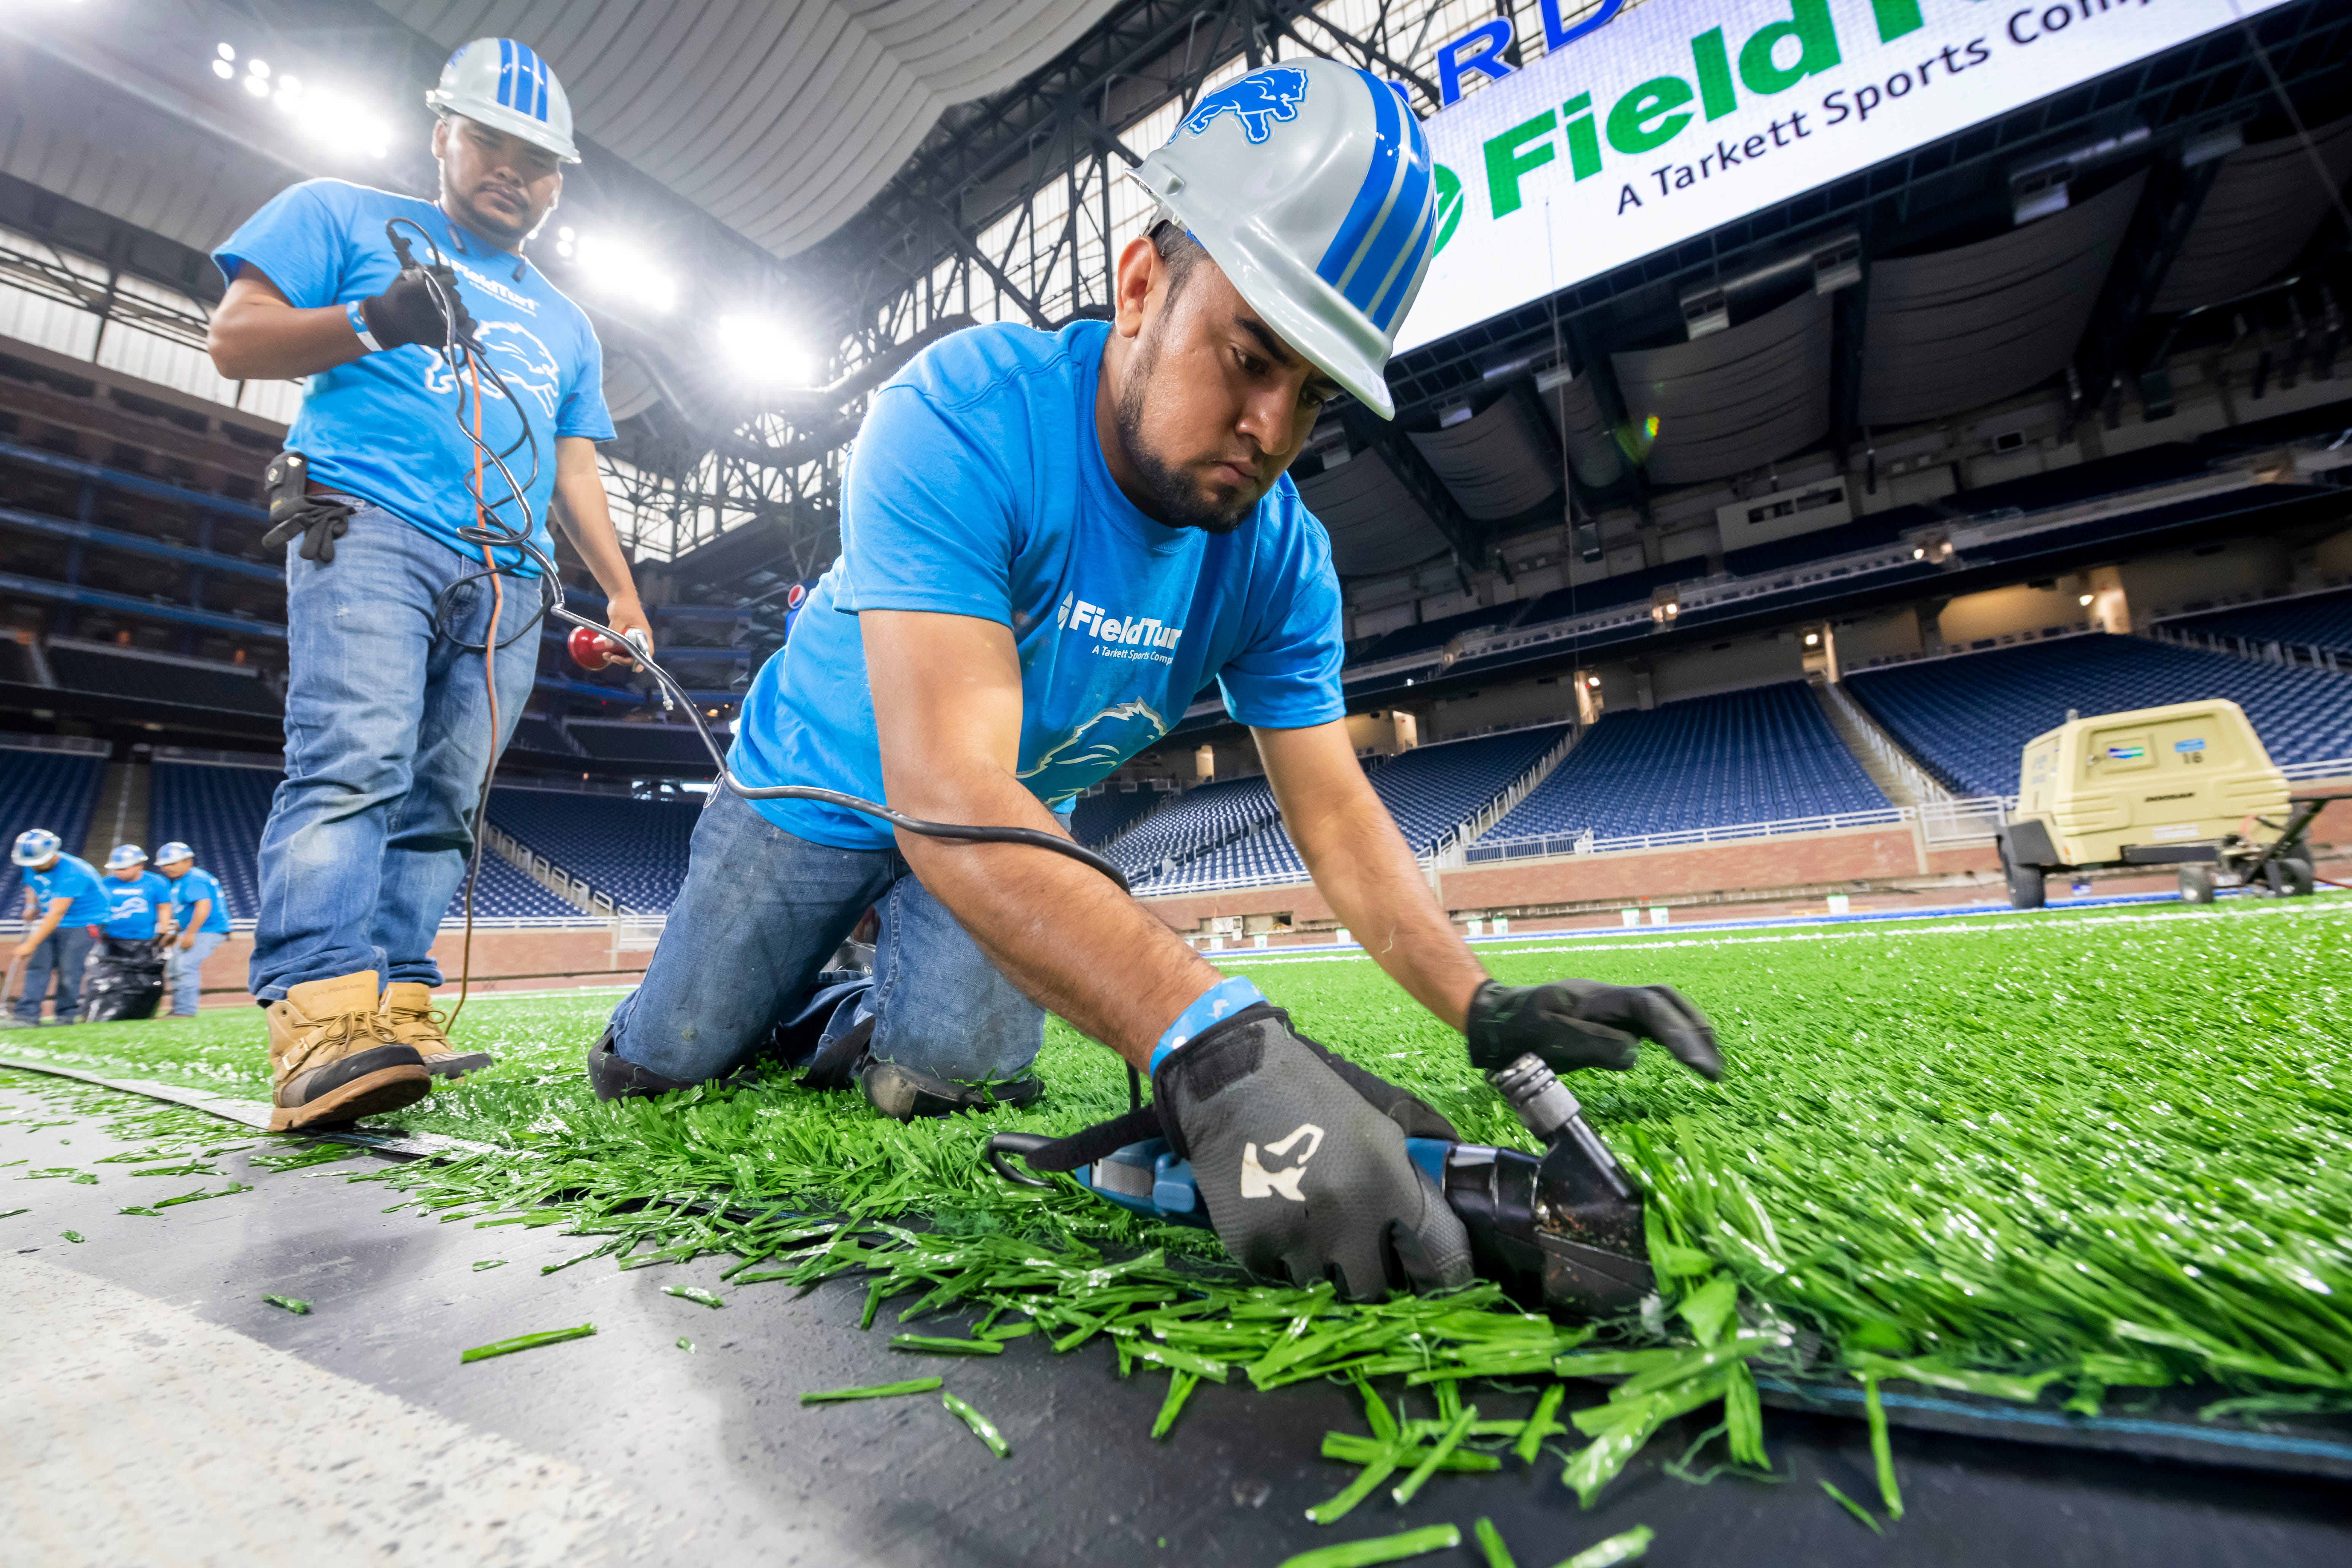 FieldTurf employee Jesus Casteneda uses sheep shearers to trim the edge of a piece of a new playing surface during installation at Ford Field in Detroit, on Thursday, May 9, 2019. The entire field is being replaced with new FieldTurf with work estimated to be finished at the end of May.